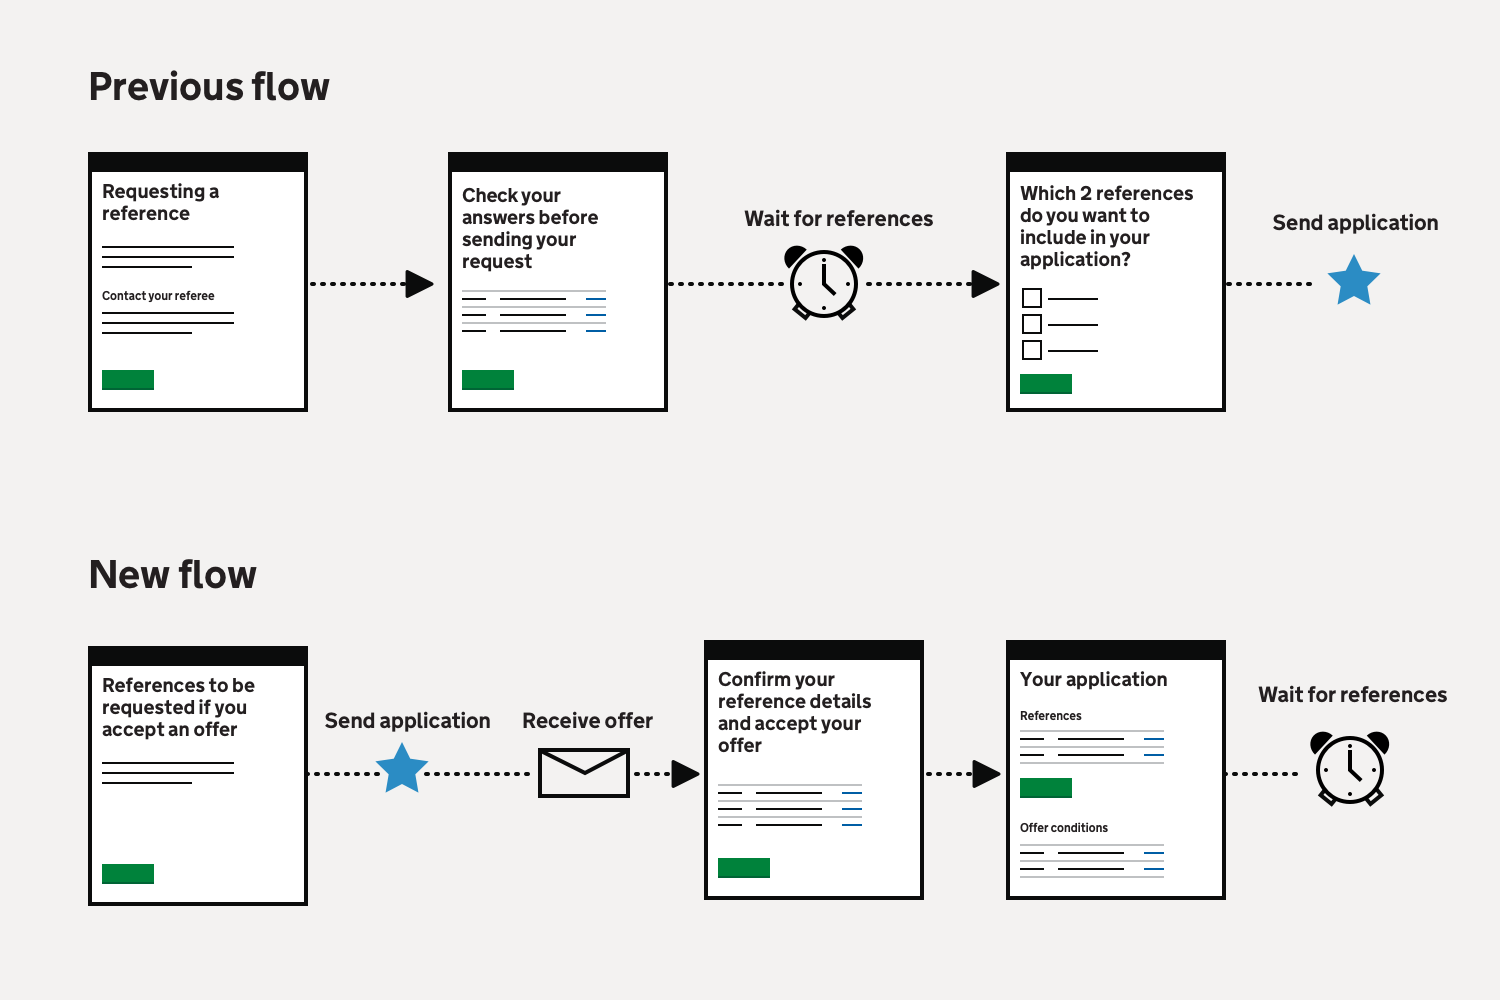 Flow diagram showing previous and new flows. In the previous flow, candidates requested references then selected 2 before sending their application. In the new flow, candidates give reference details then send their application. After they receive an offer, candidates check reference details and request references.